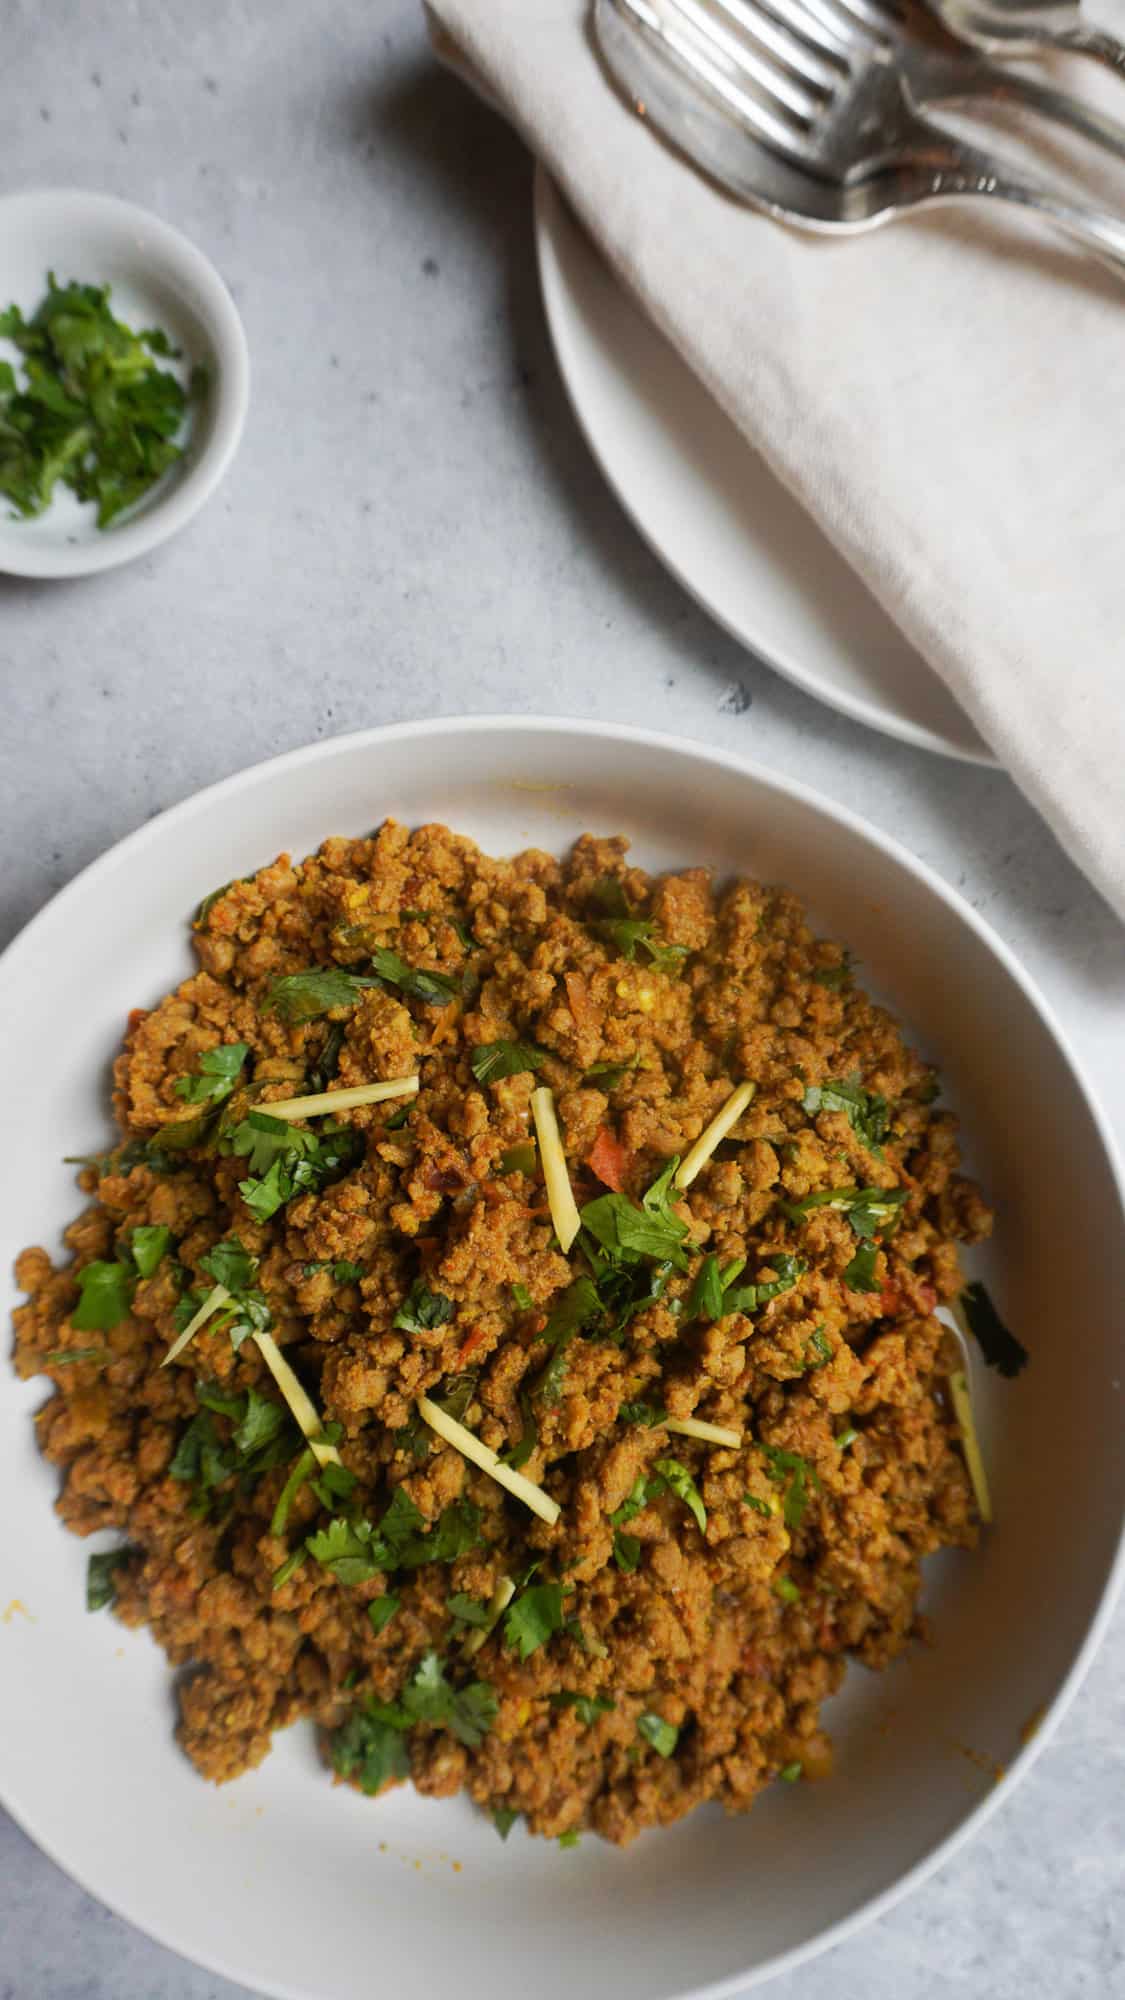 keema garnished with ginger and cilantro